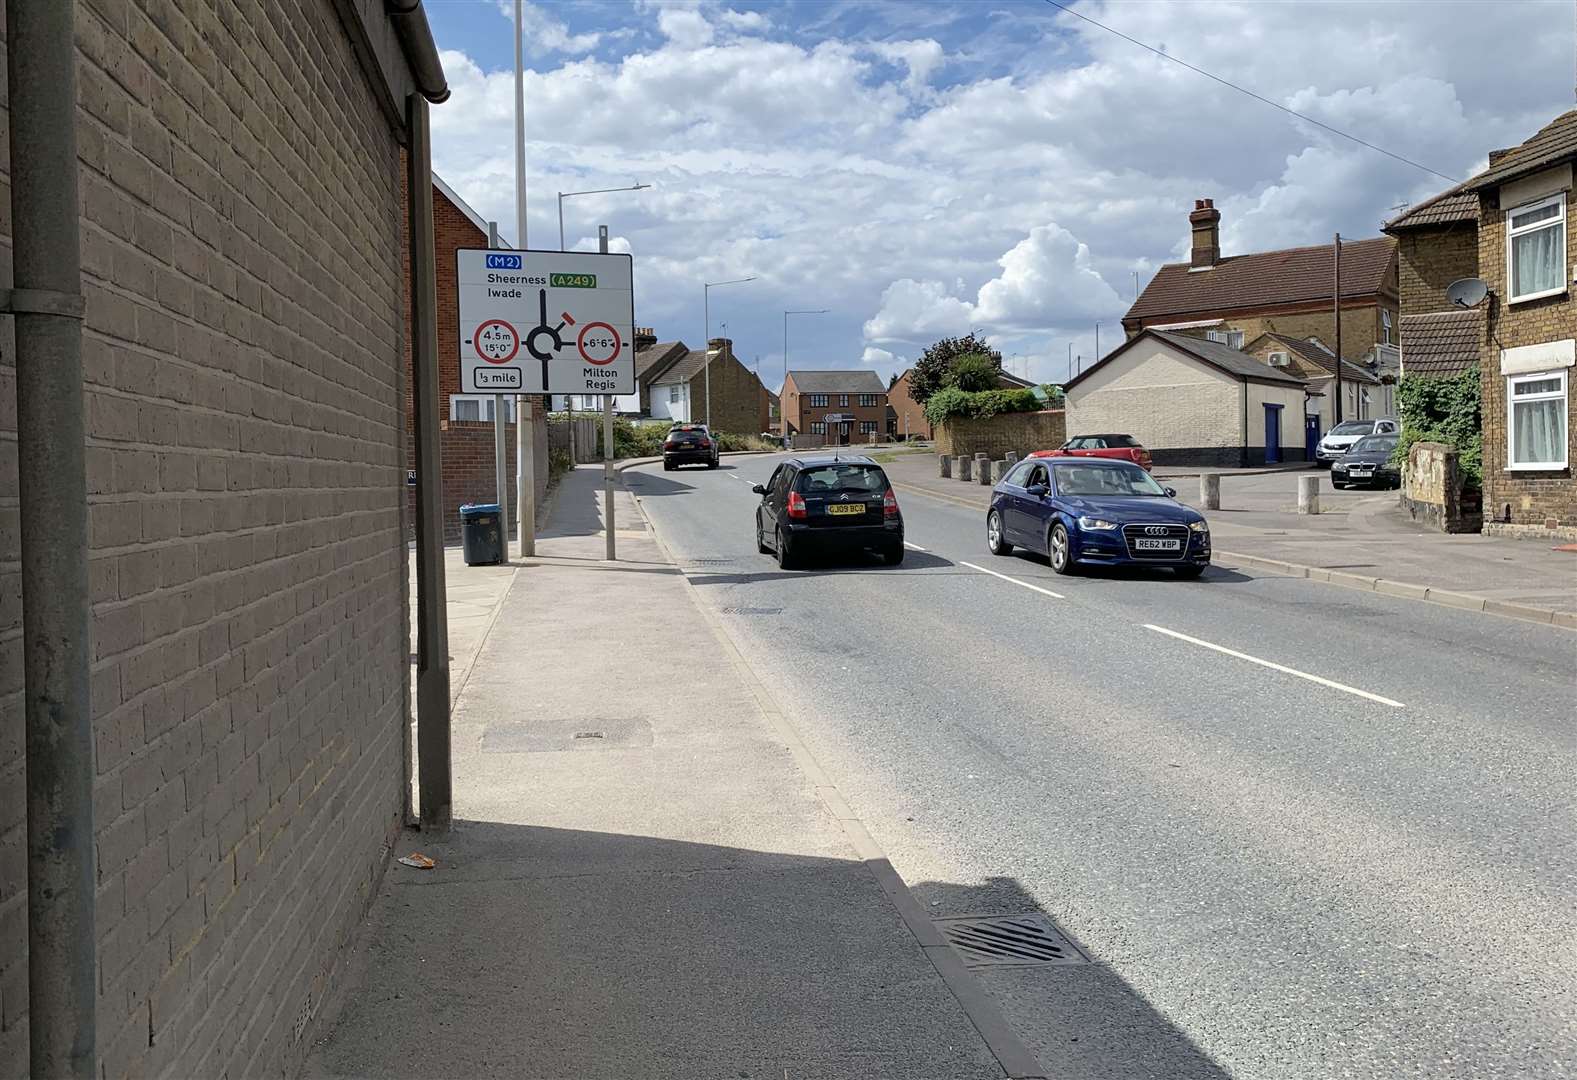 St Pauls Street in Milton Regis, near Sittingbourne, is one of the most polluted roads in Swale